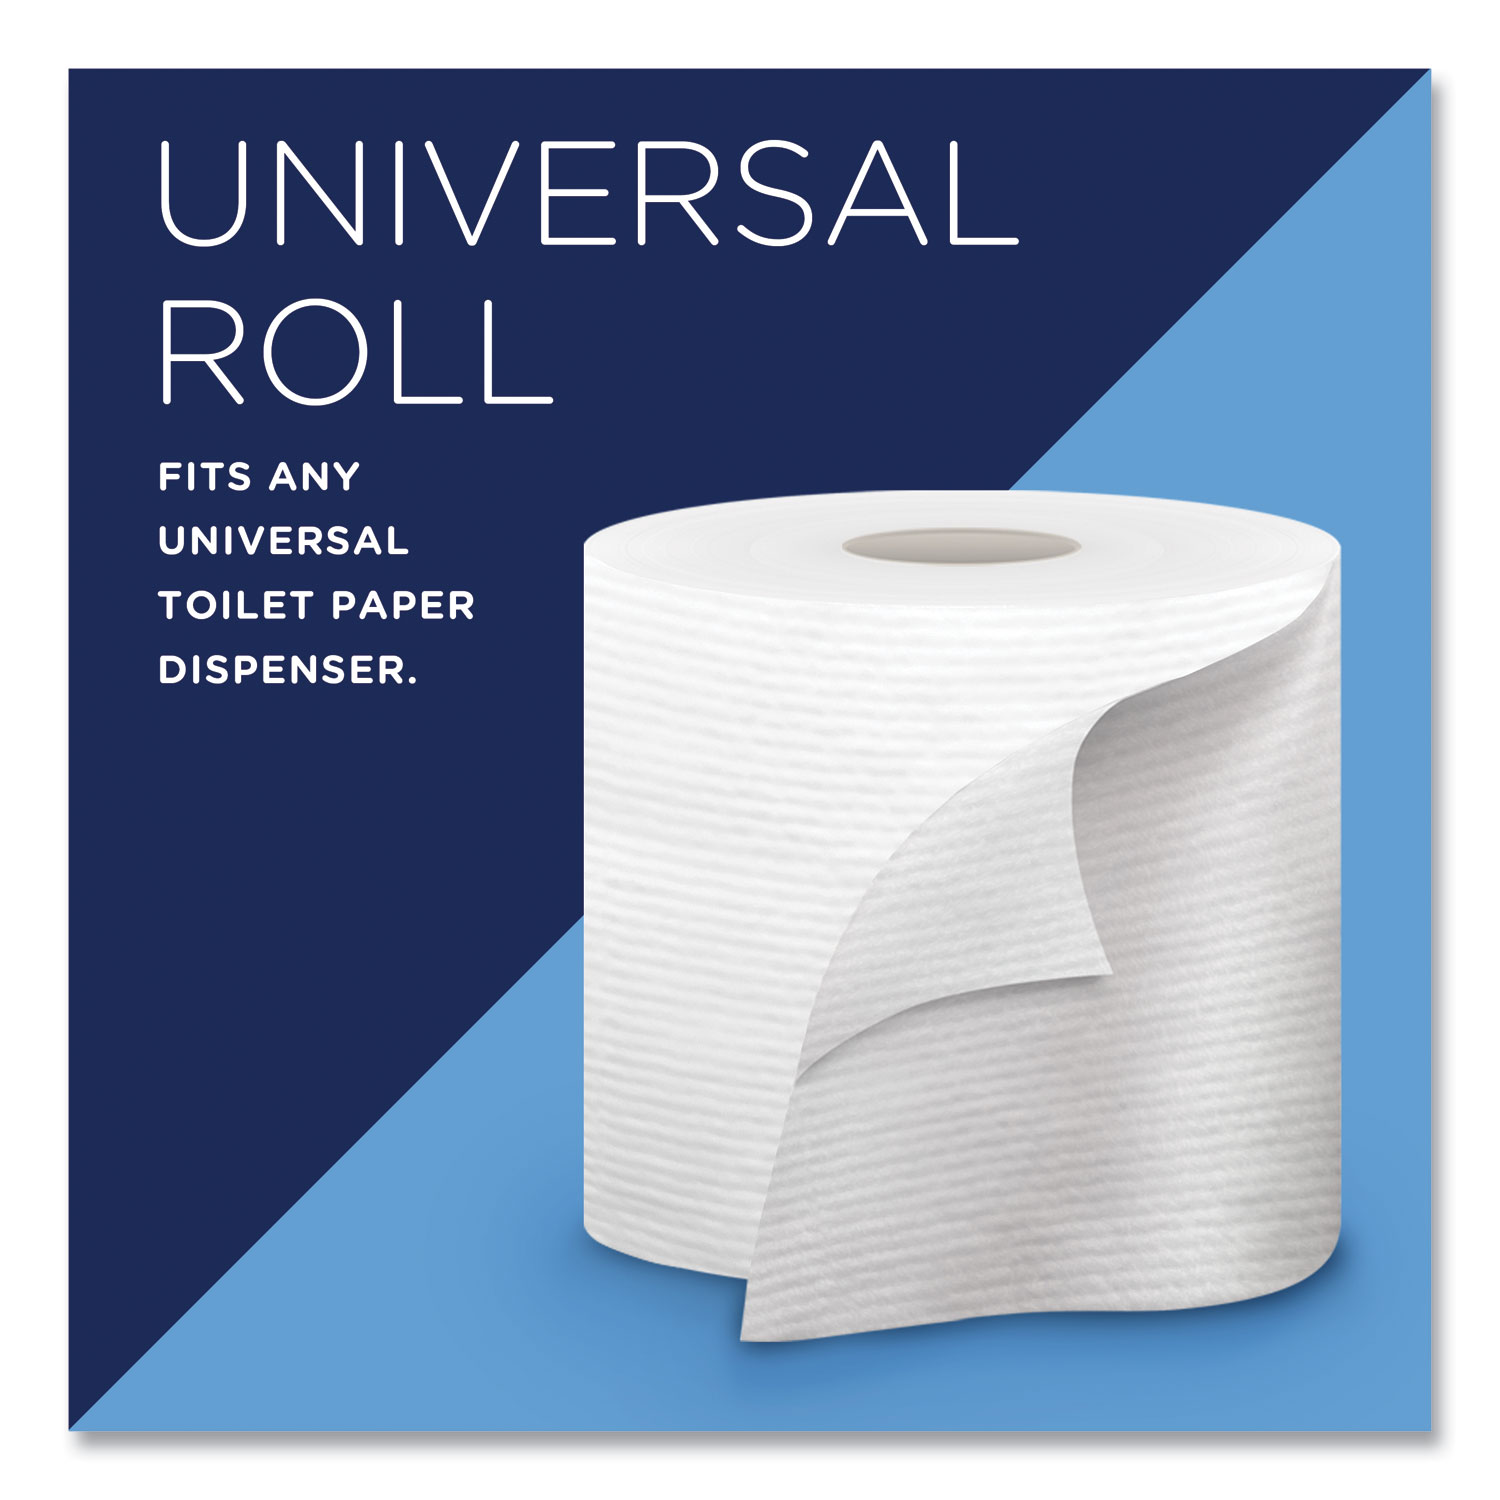 Small rolls of toilet paper, household roll – TORK: tissue, 4-ply, ultra  bright white, pack of 42 rolls (153 sheets/roll)